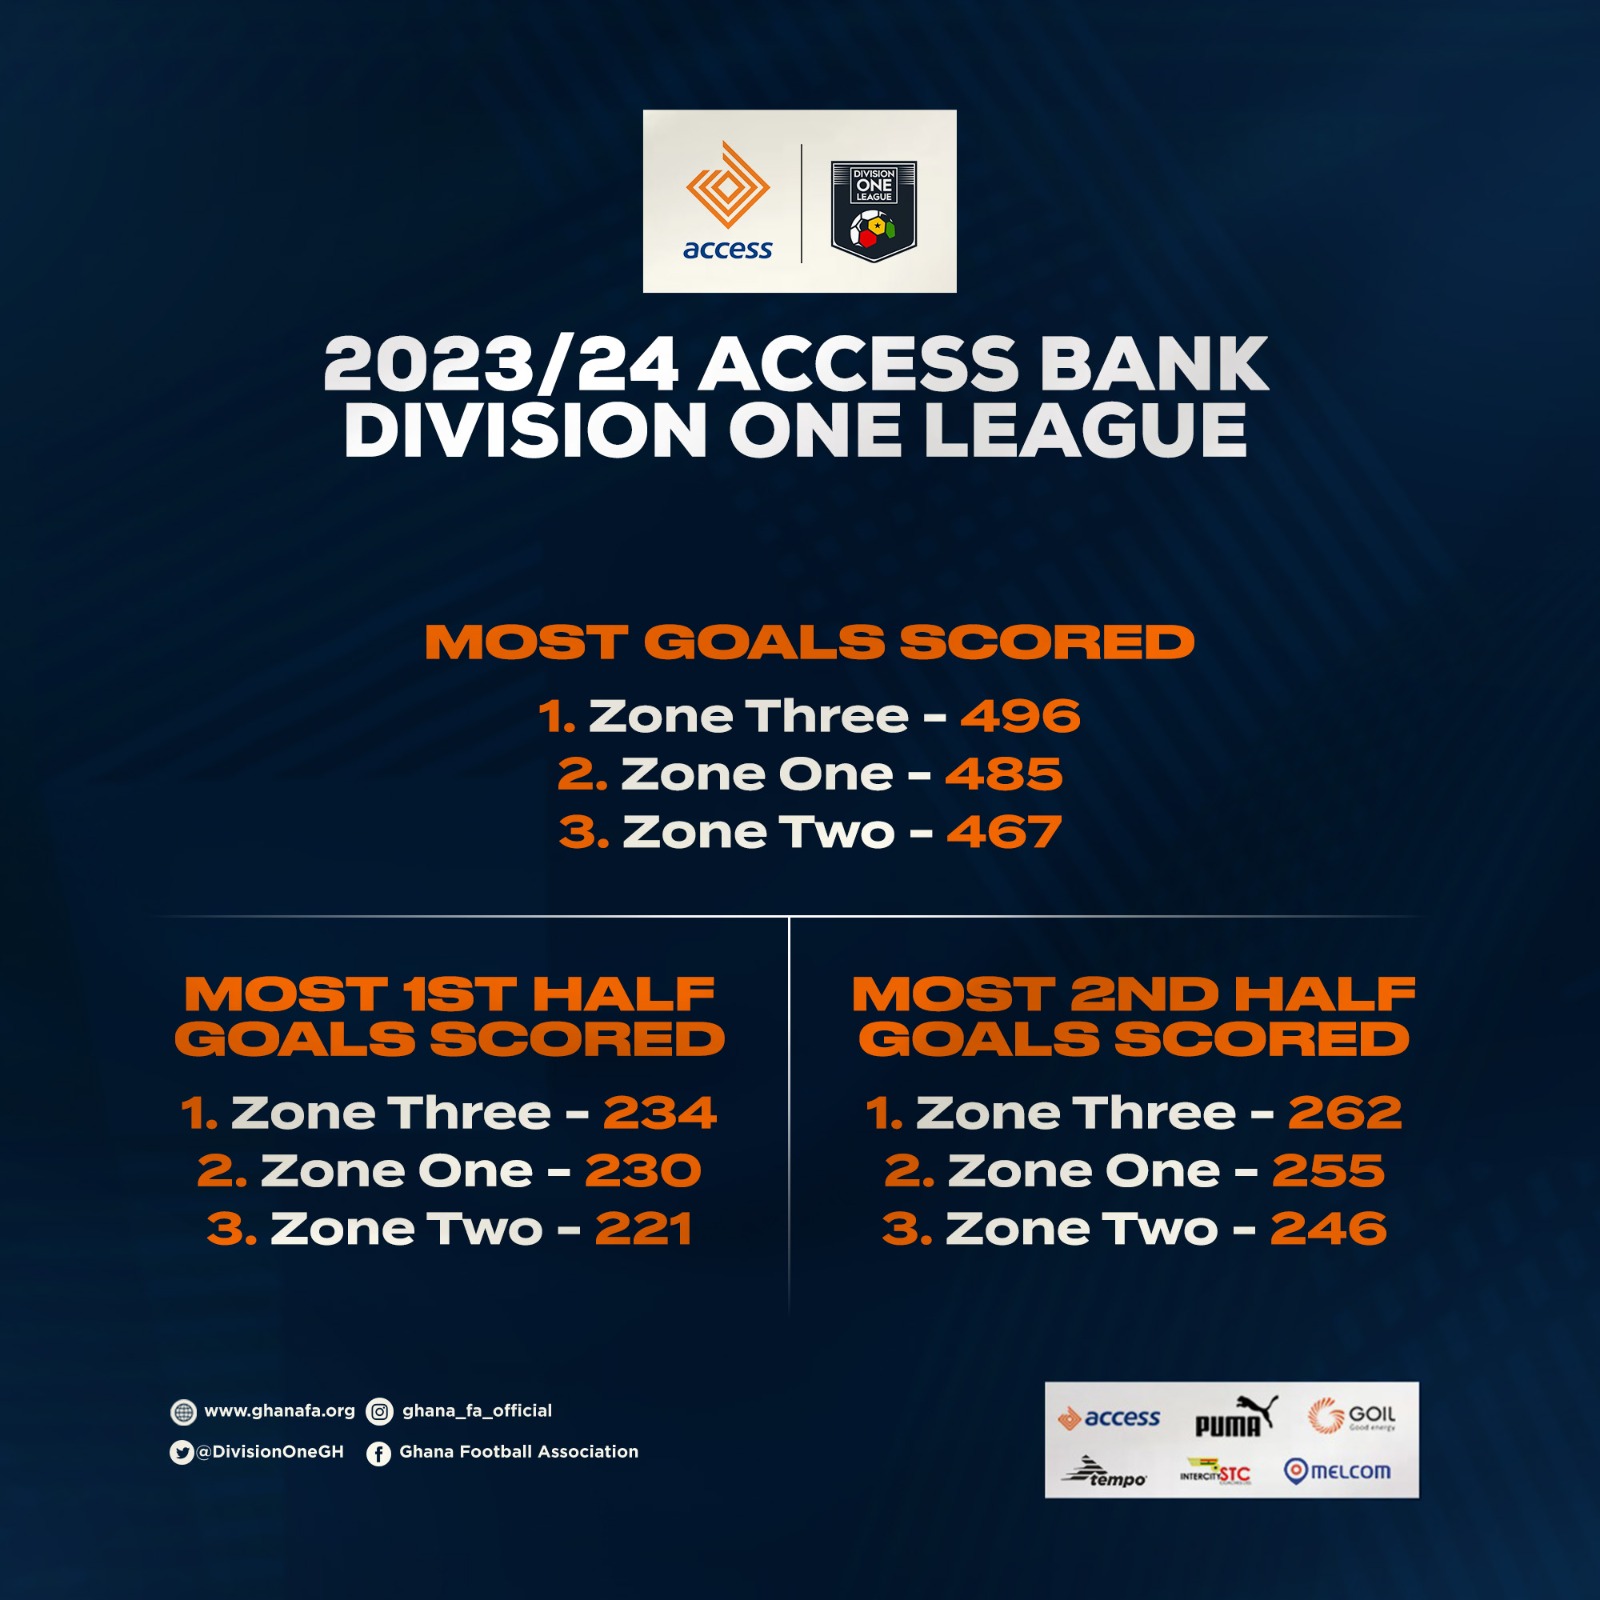 Access Bank DOL Review: Zone Three record most goals in 2023/24 season